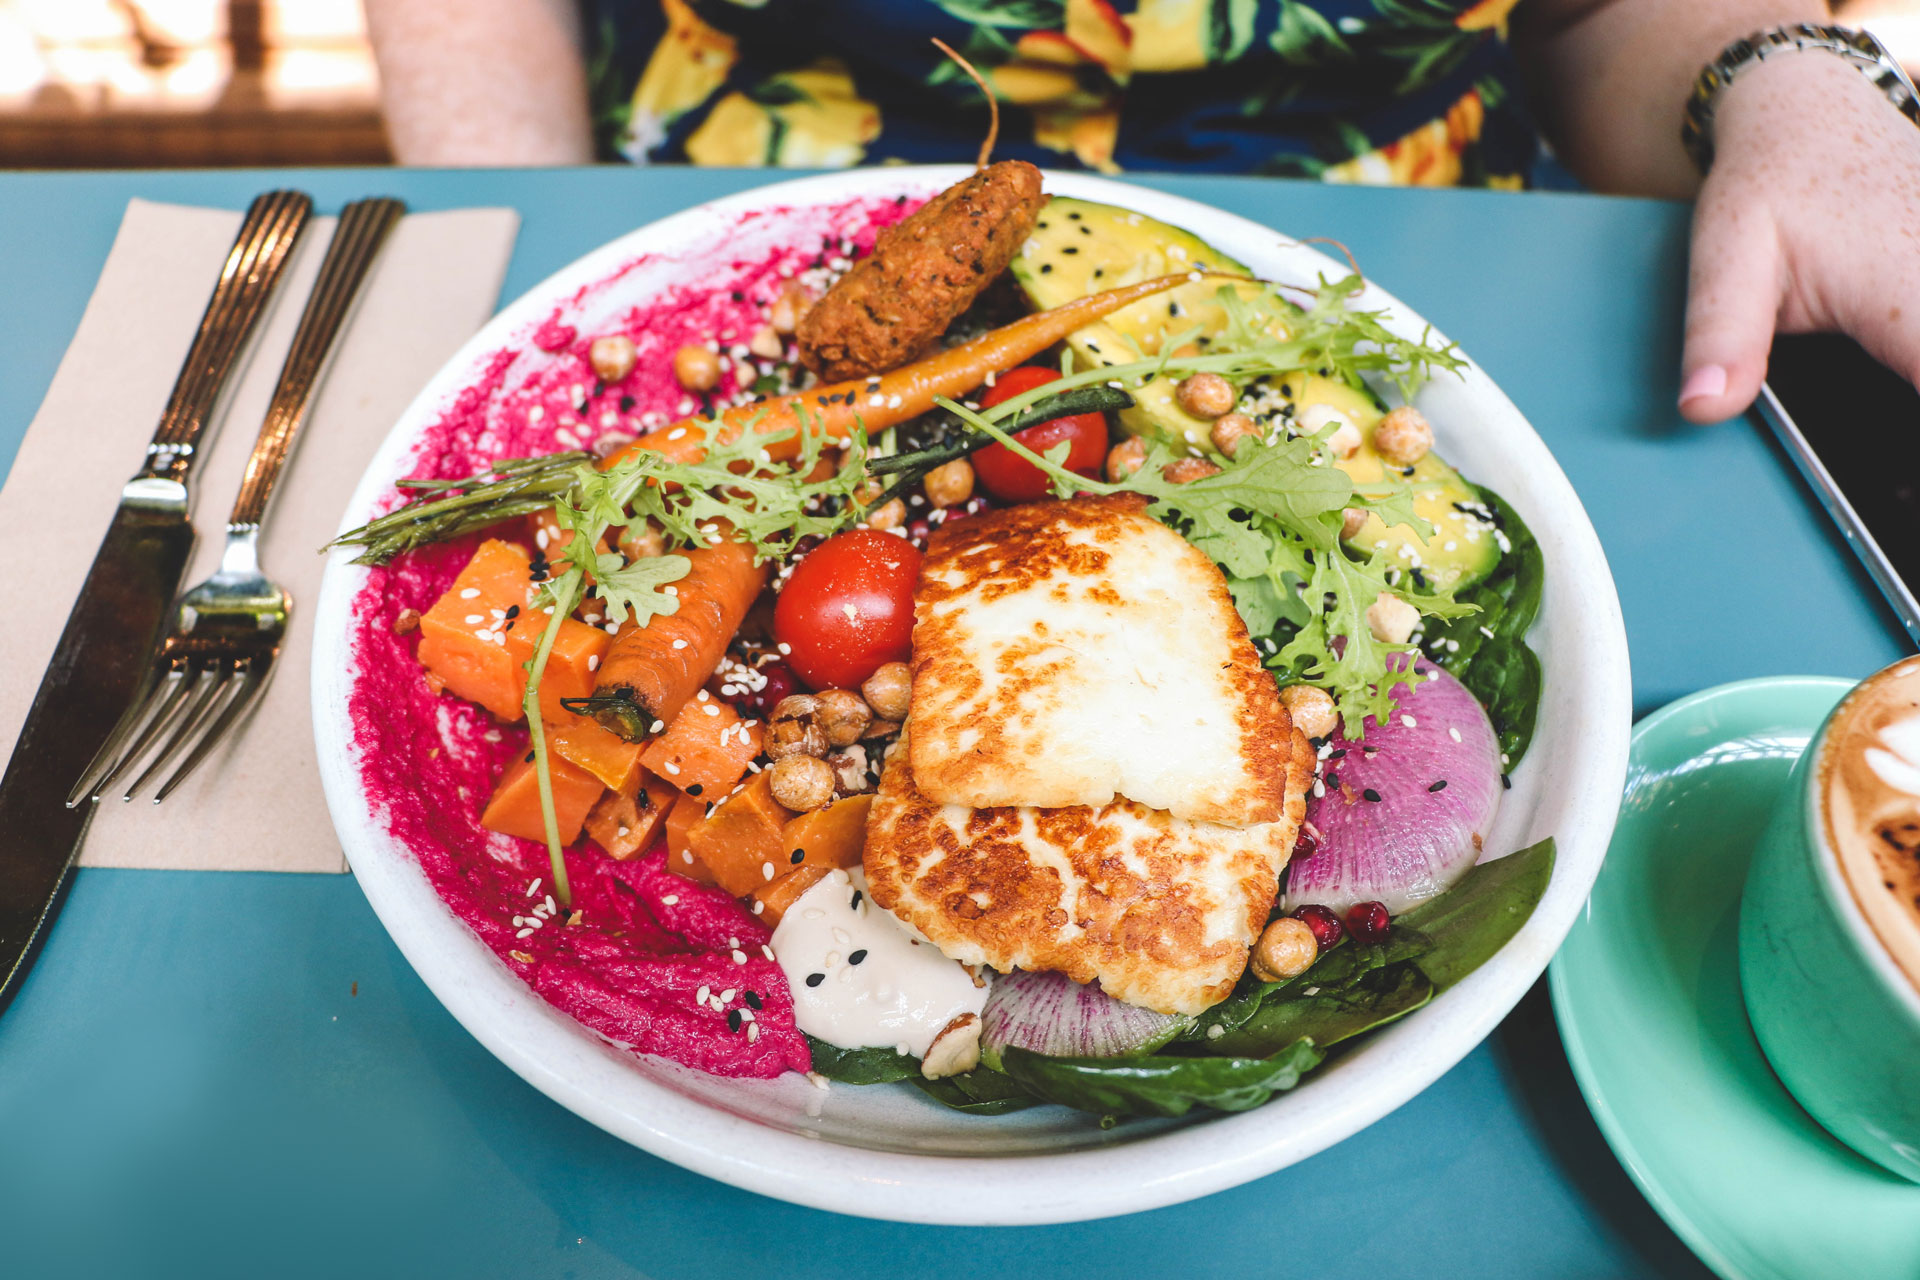 Review: Flower Child Chatswood - The Vegan Bowl